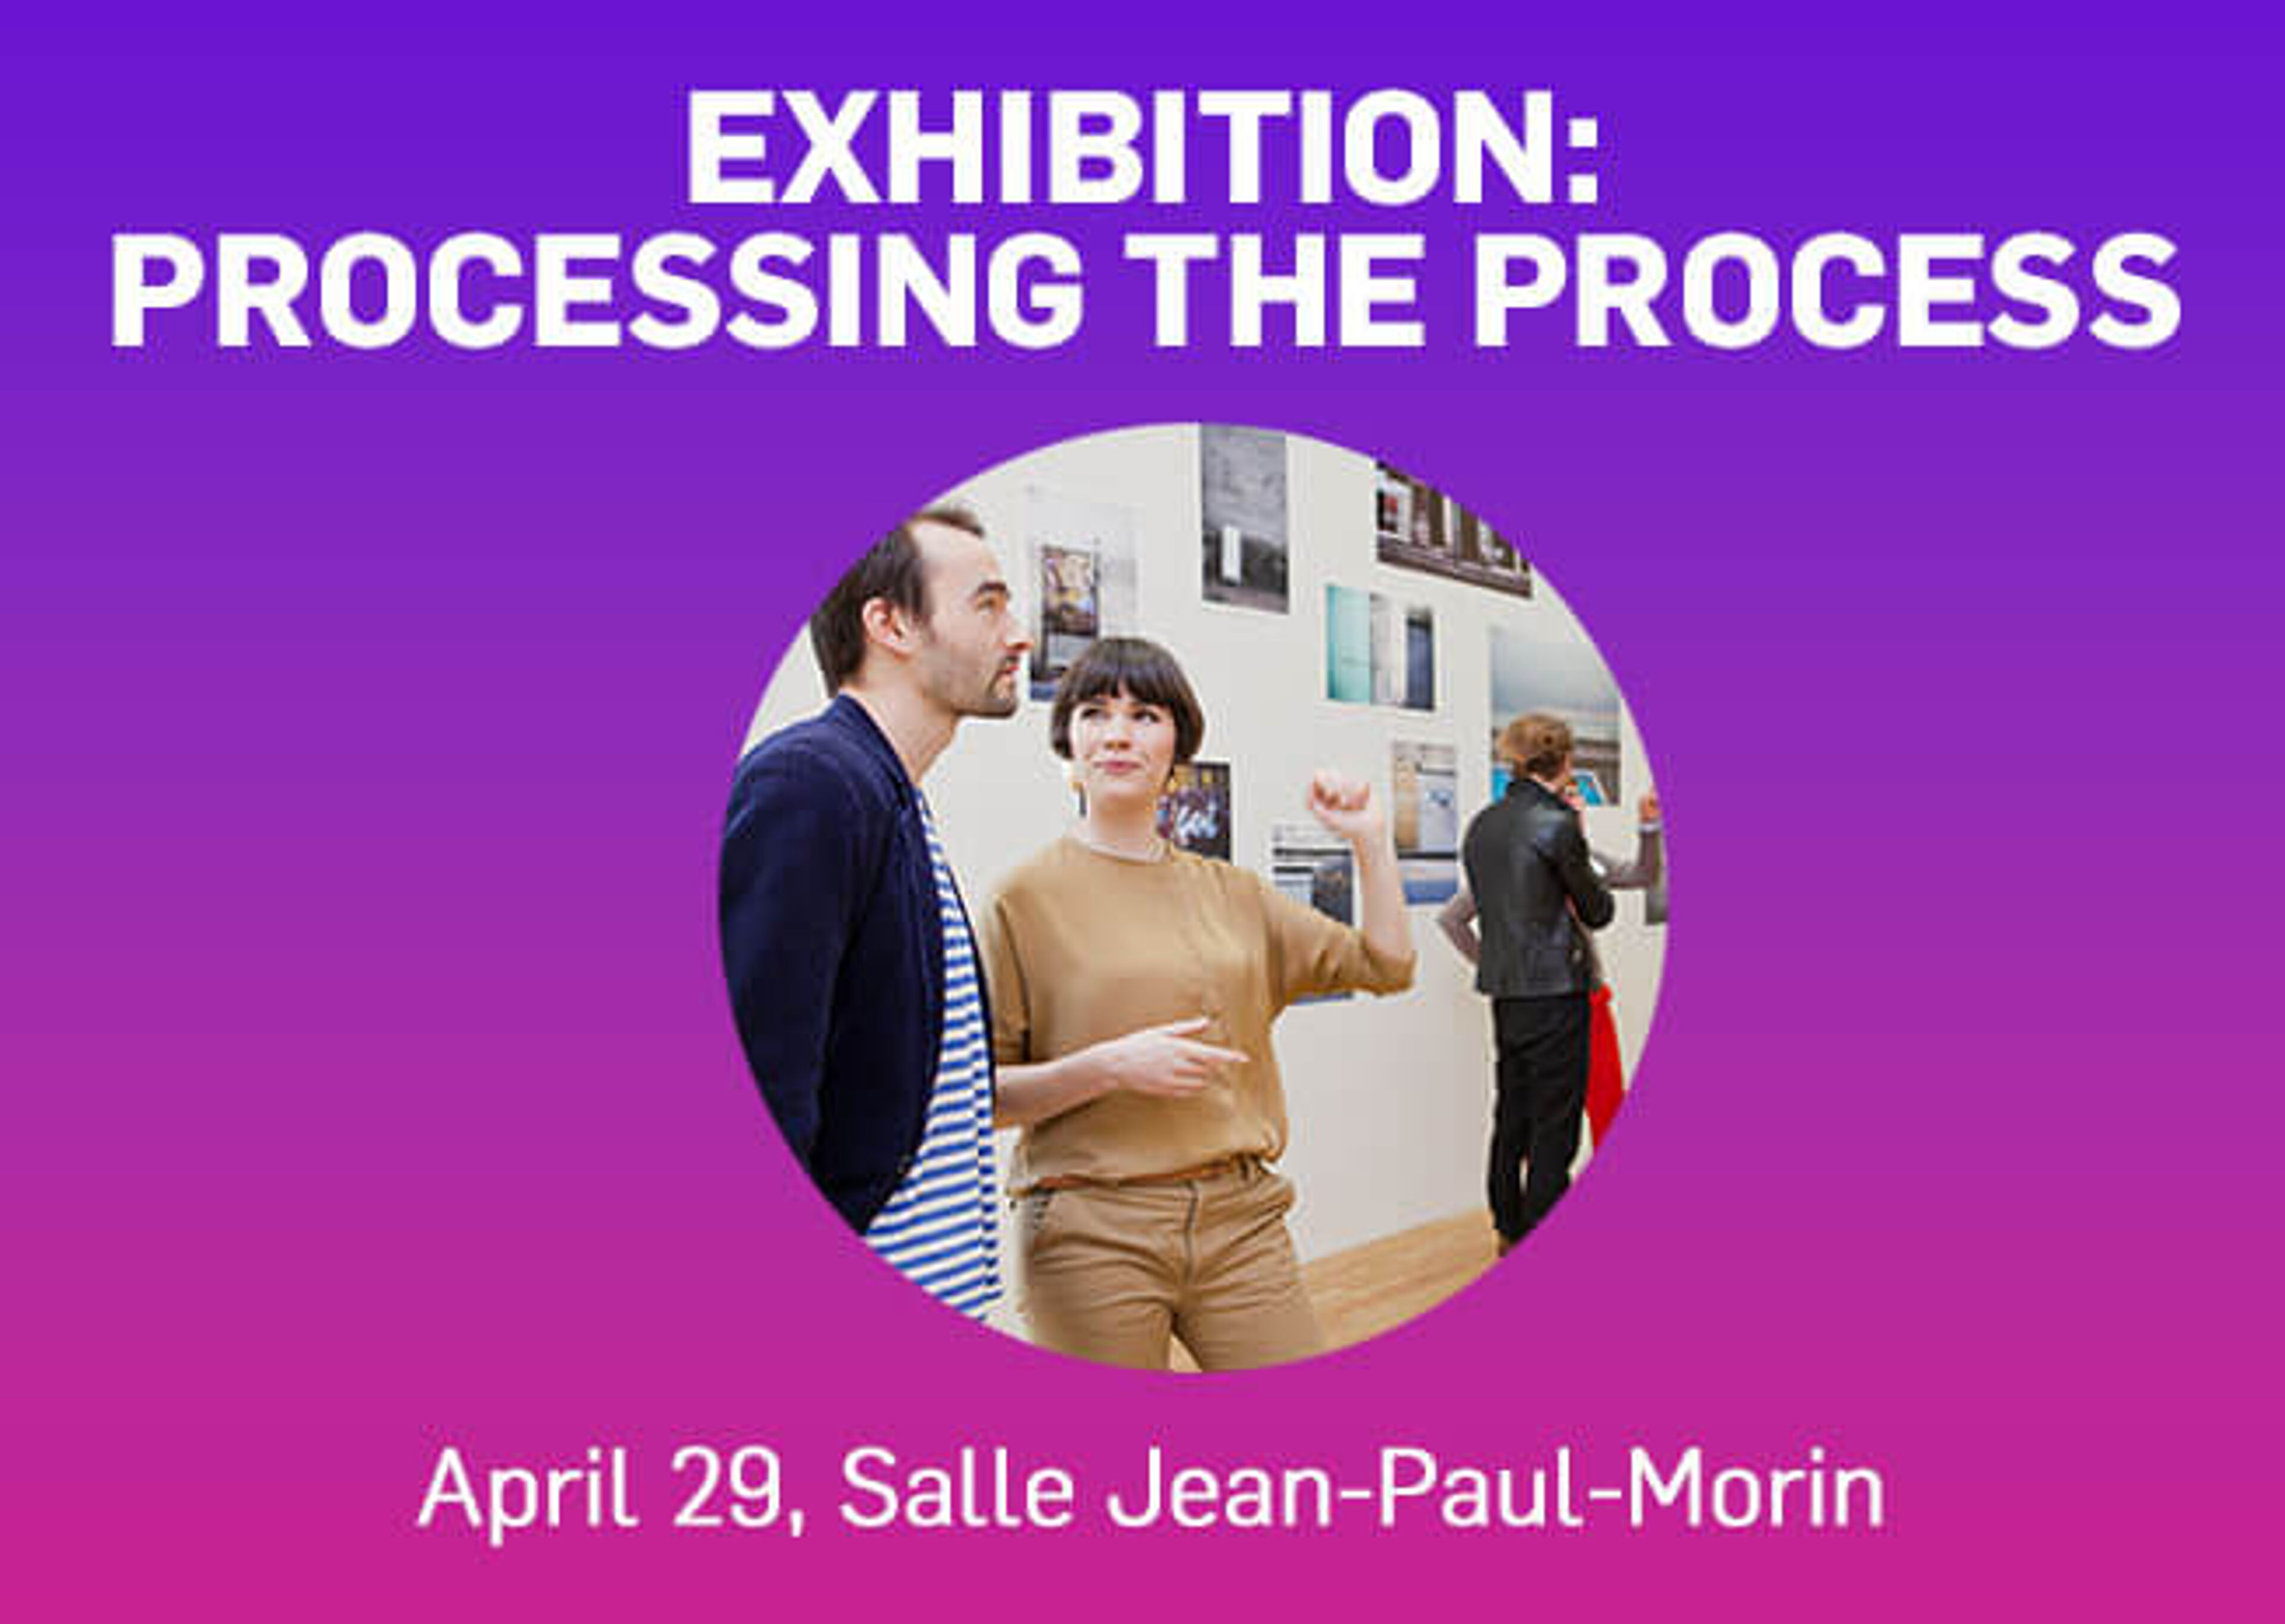 Two visitors engaging with a photography exhibition titled "Processing the Process" on April 29 at Salle Jean-Paul-Morin.